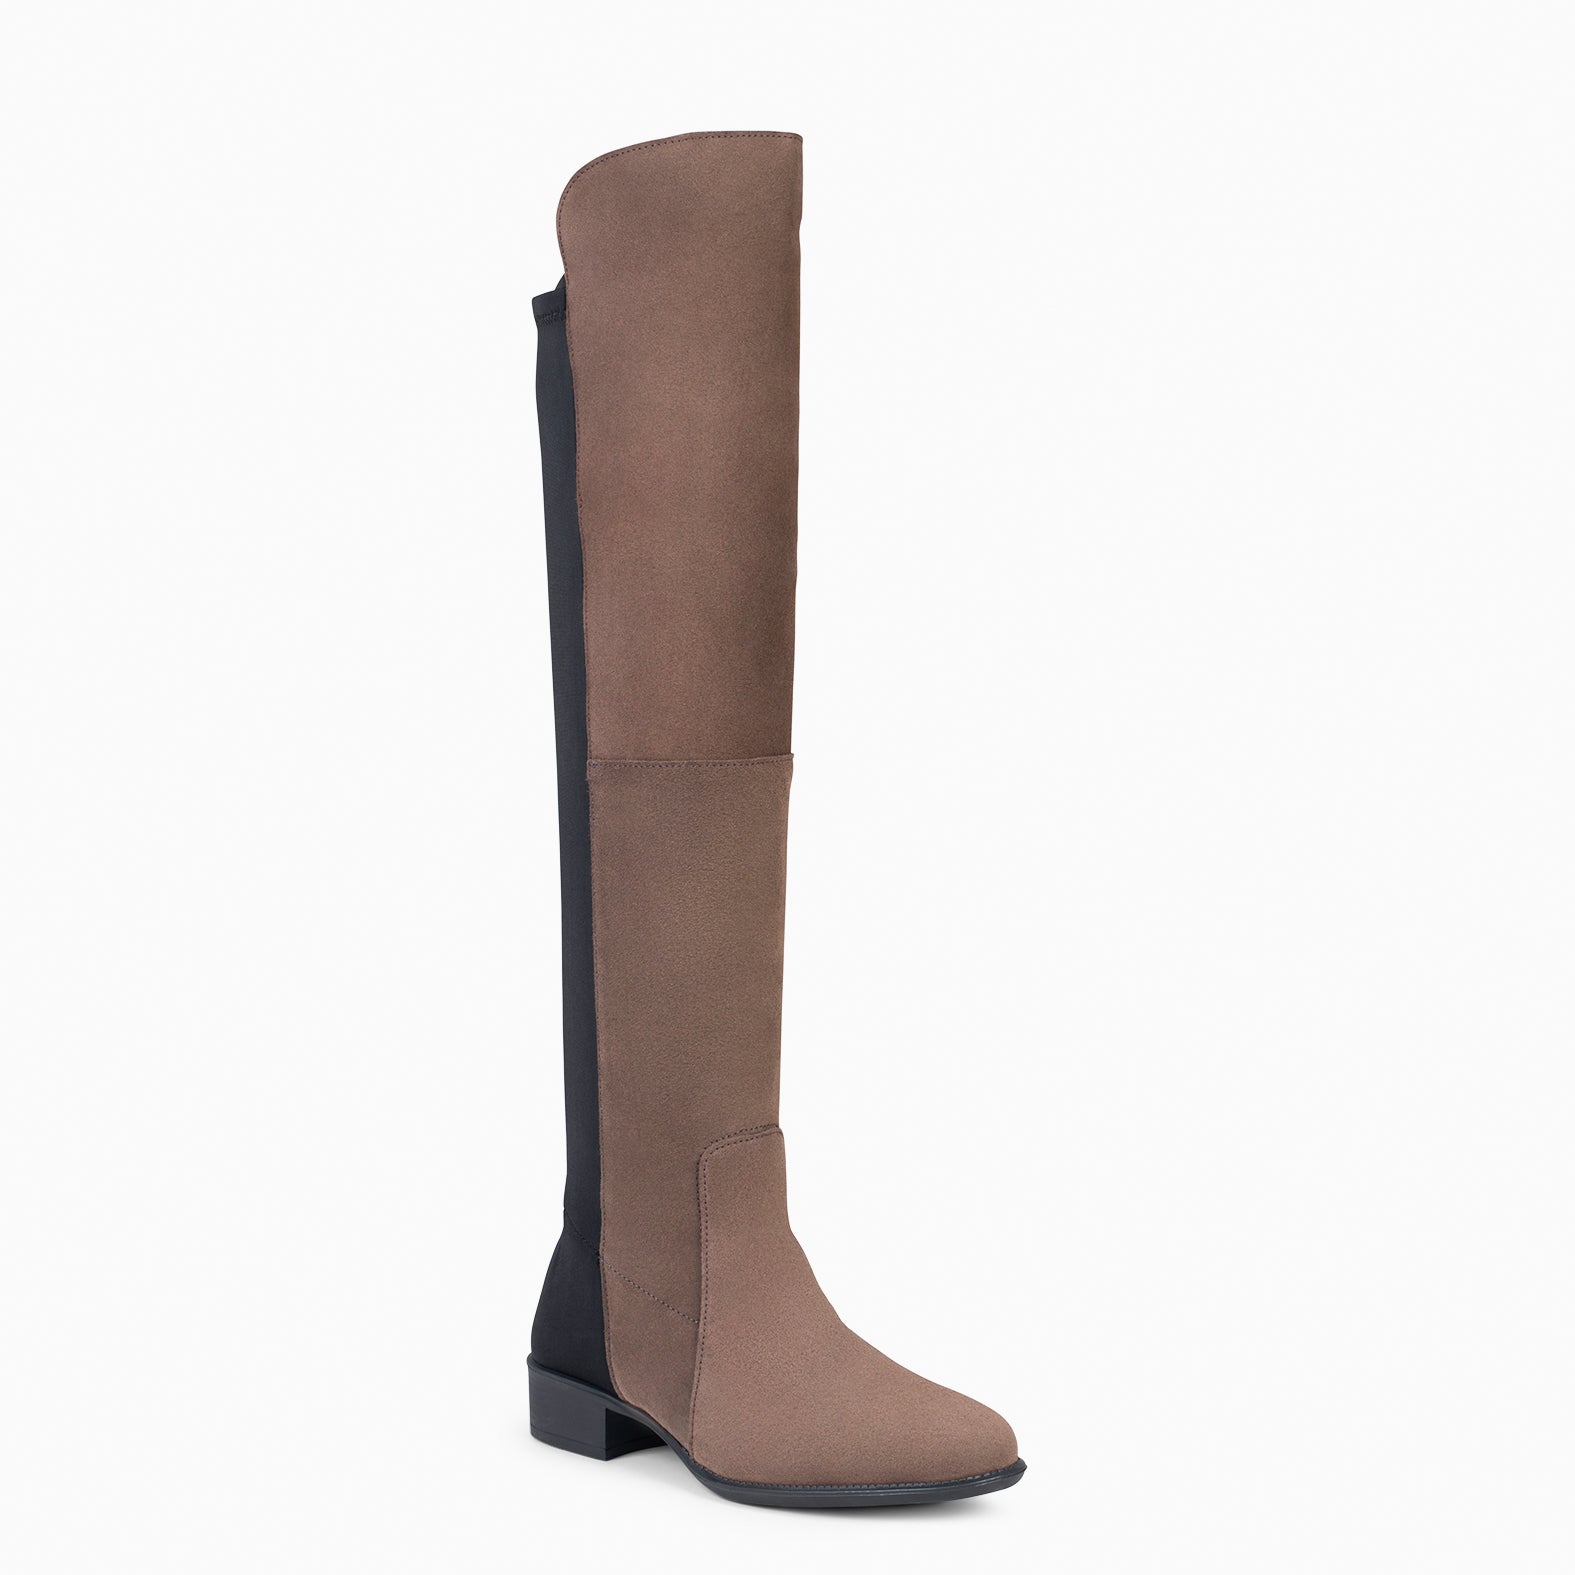 ELASTIC – TAUPE knee-high and low heel boot